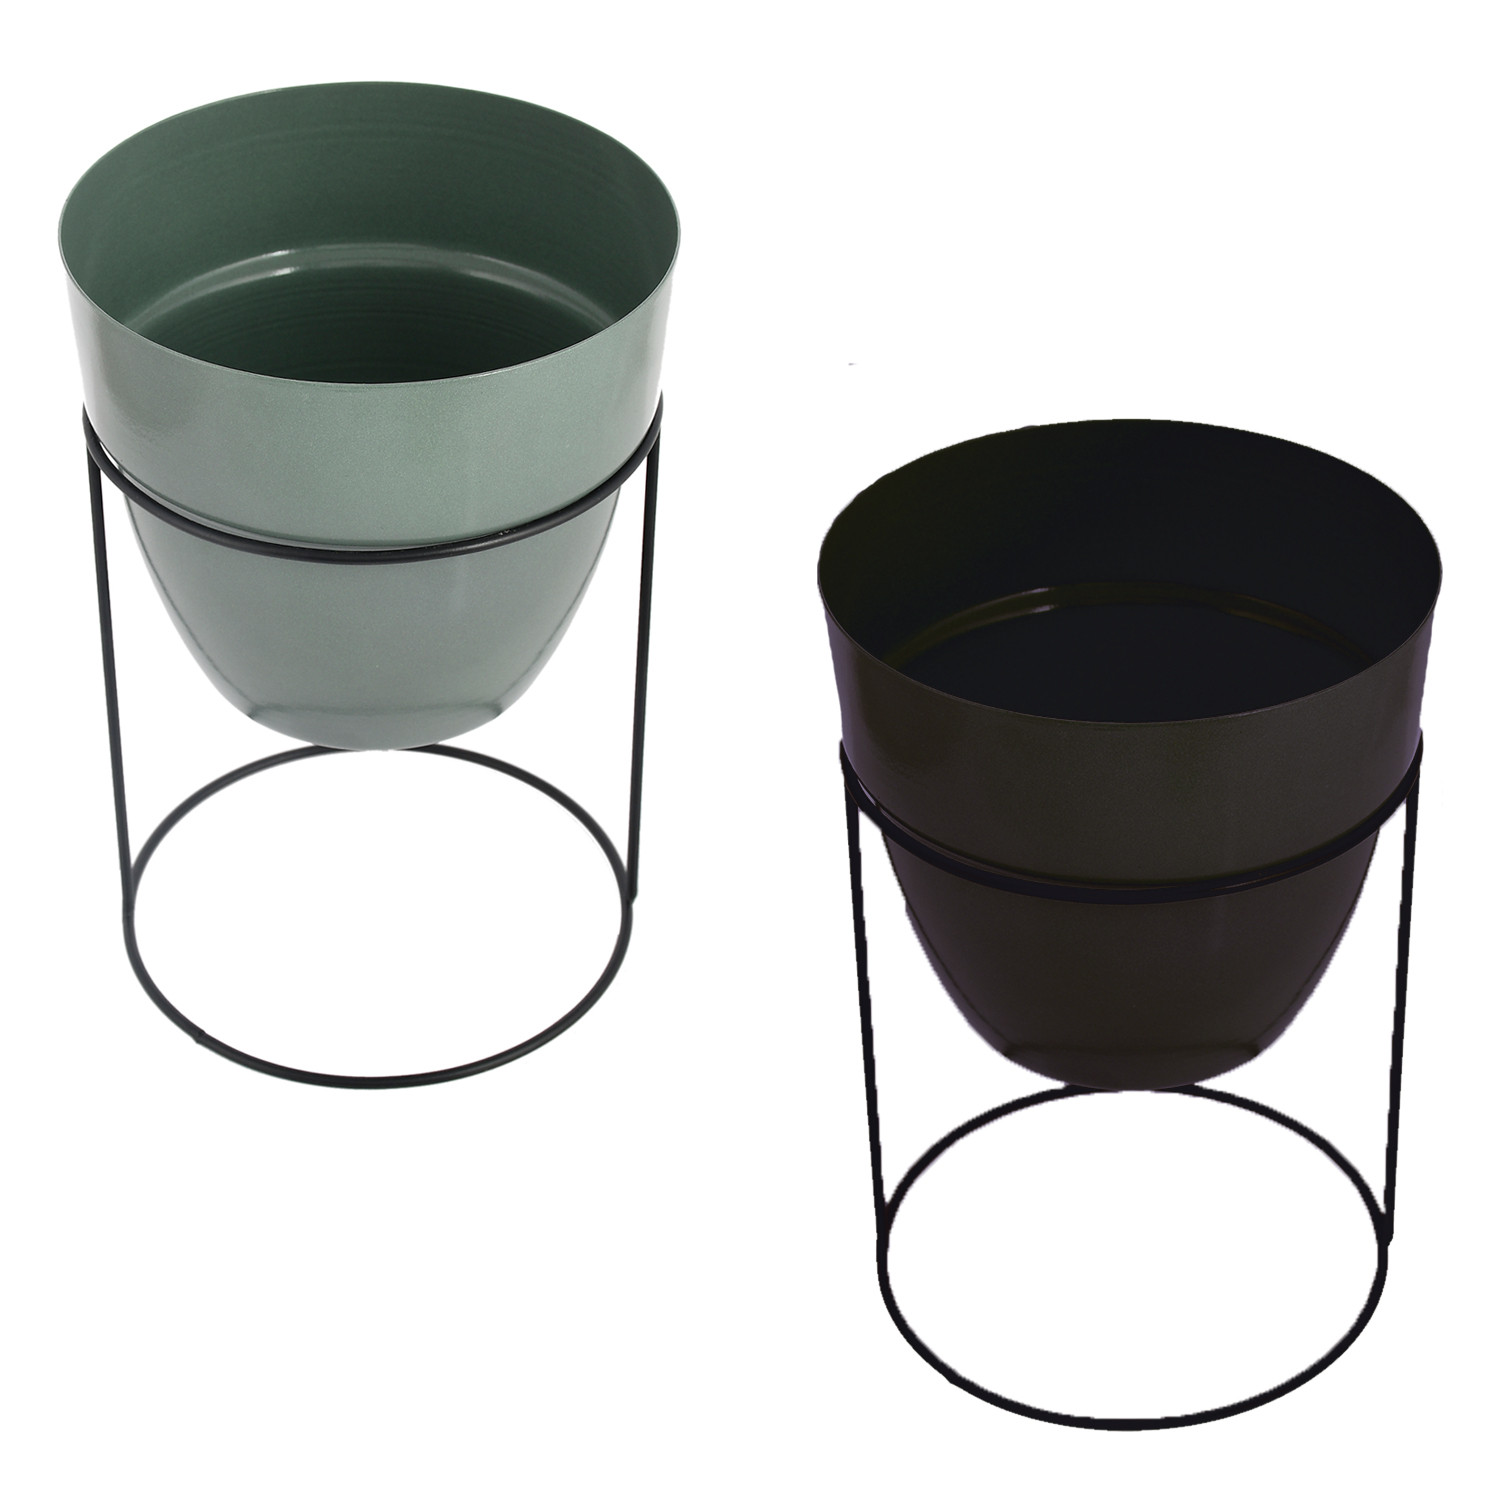 Kuber Industries Metal Planter|Decorative Modern Indoor Desk Pot|Iron Table Stand Flower Planter Pot For Home Décor,8.5 Inches,Pack of 2 (Green & Black)